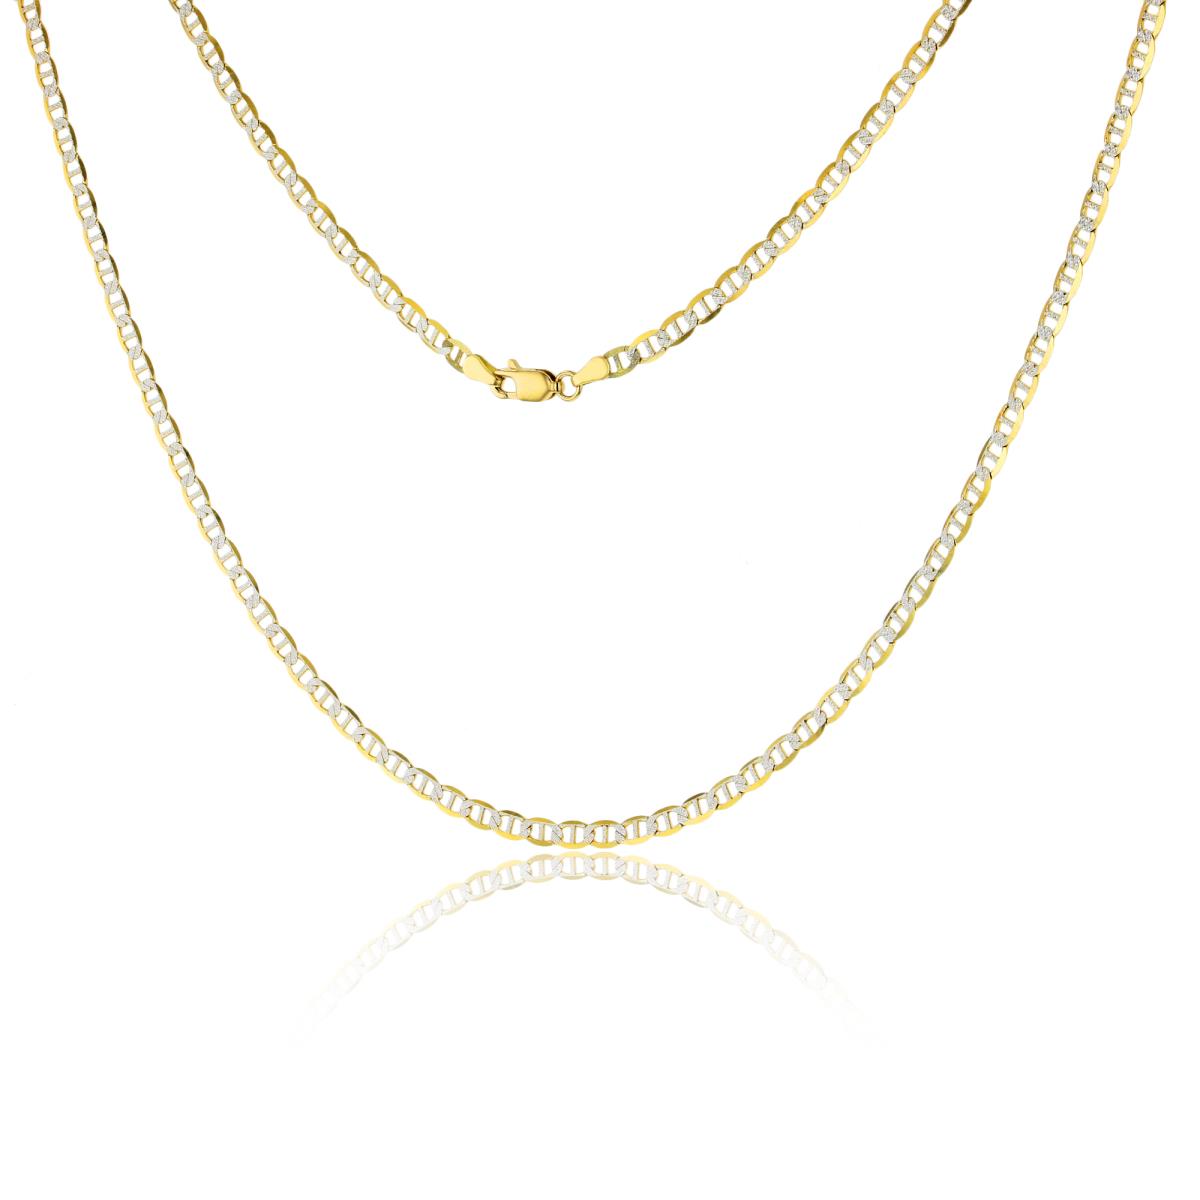 10K Gold Two-Tone 3.50mm 20" Mariner Pave Link Chain